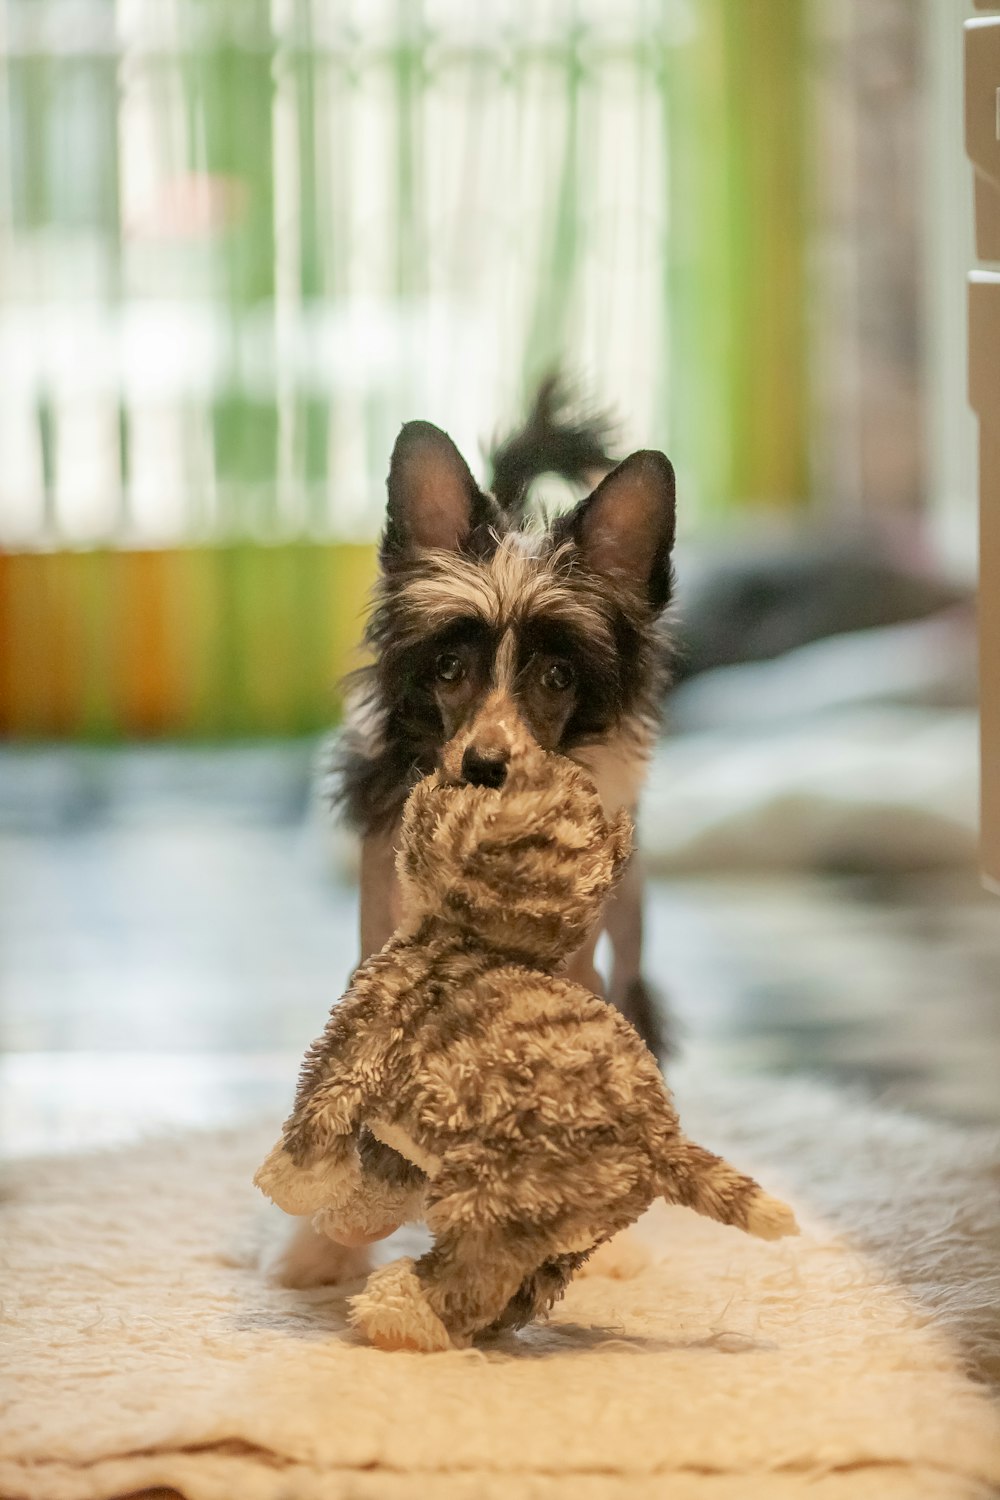 a small dog standing on its hind legs holding a stuffed animal